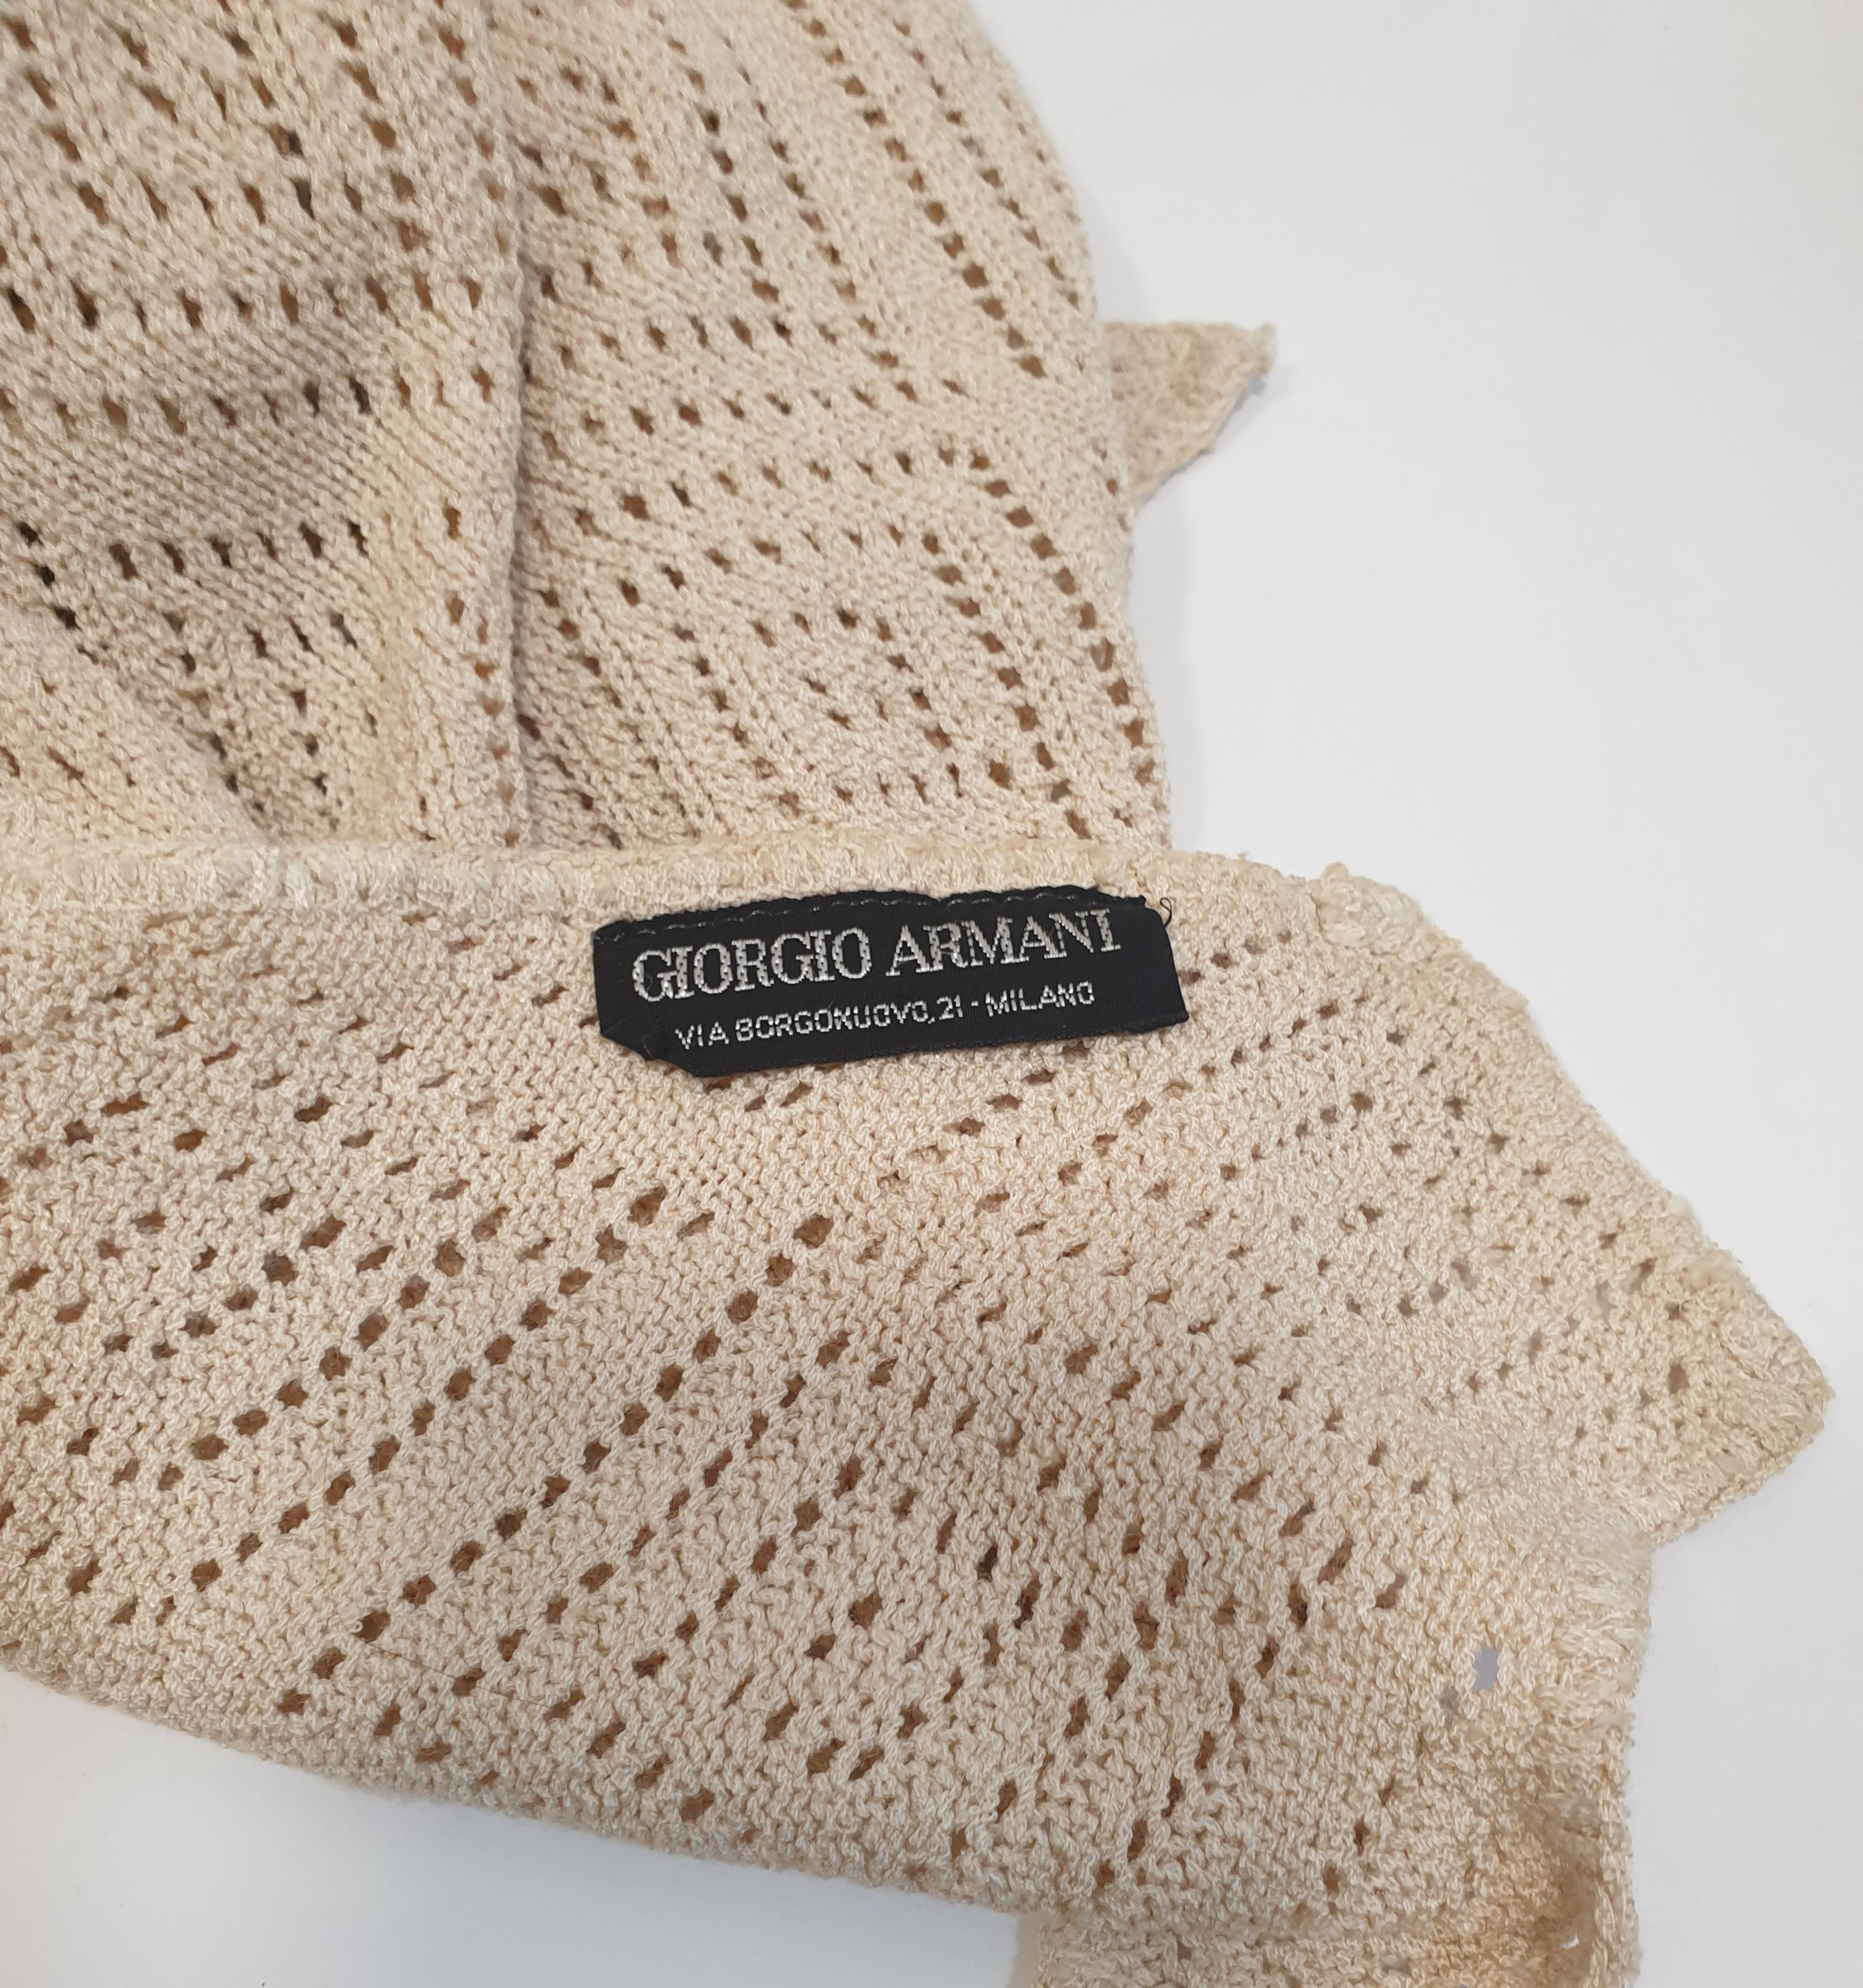 Giorgio Armani Beige Knitted Pashmina with Openwork For Sale 1